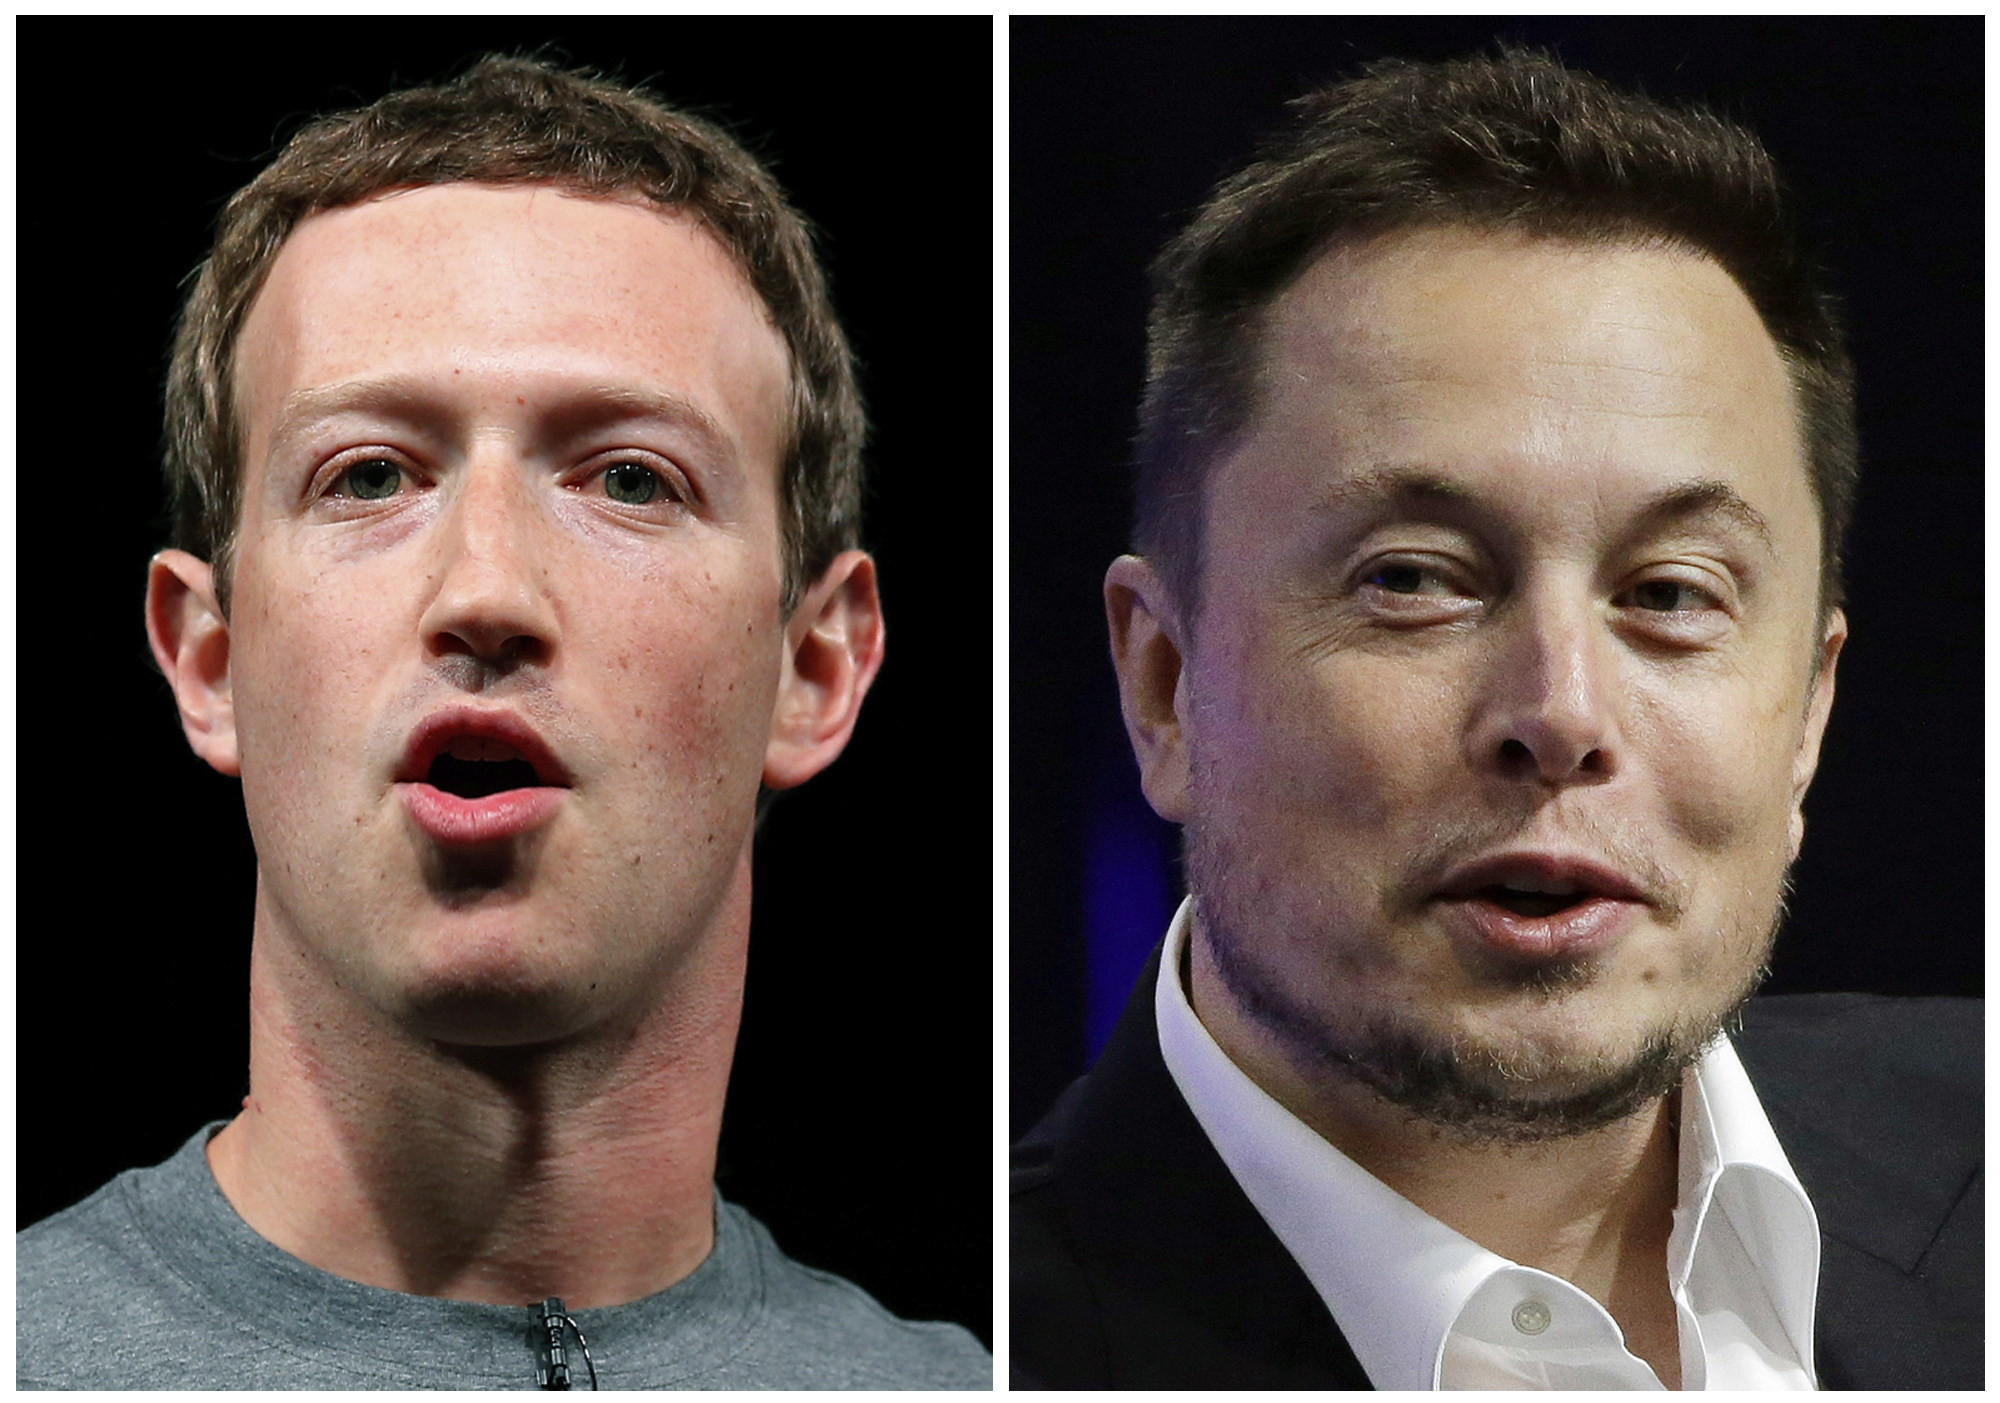 The prospect of the fight first surfaced in June after Elon Musk (right) challenged Mark Zuckerberg, who agreed.  Photos: AP